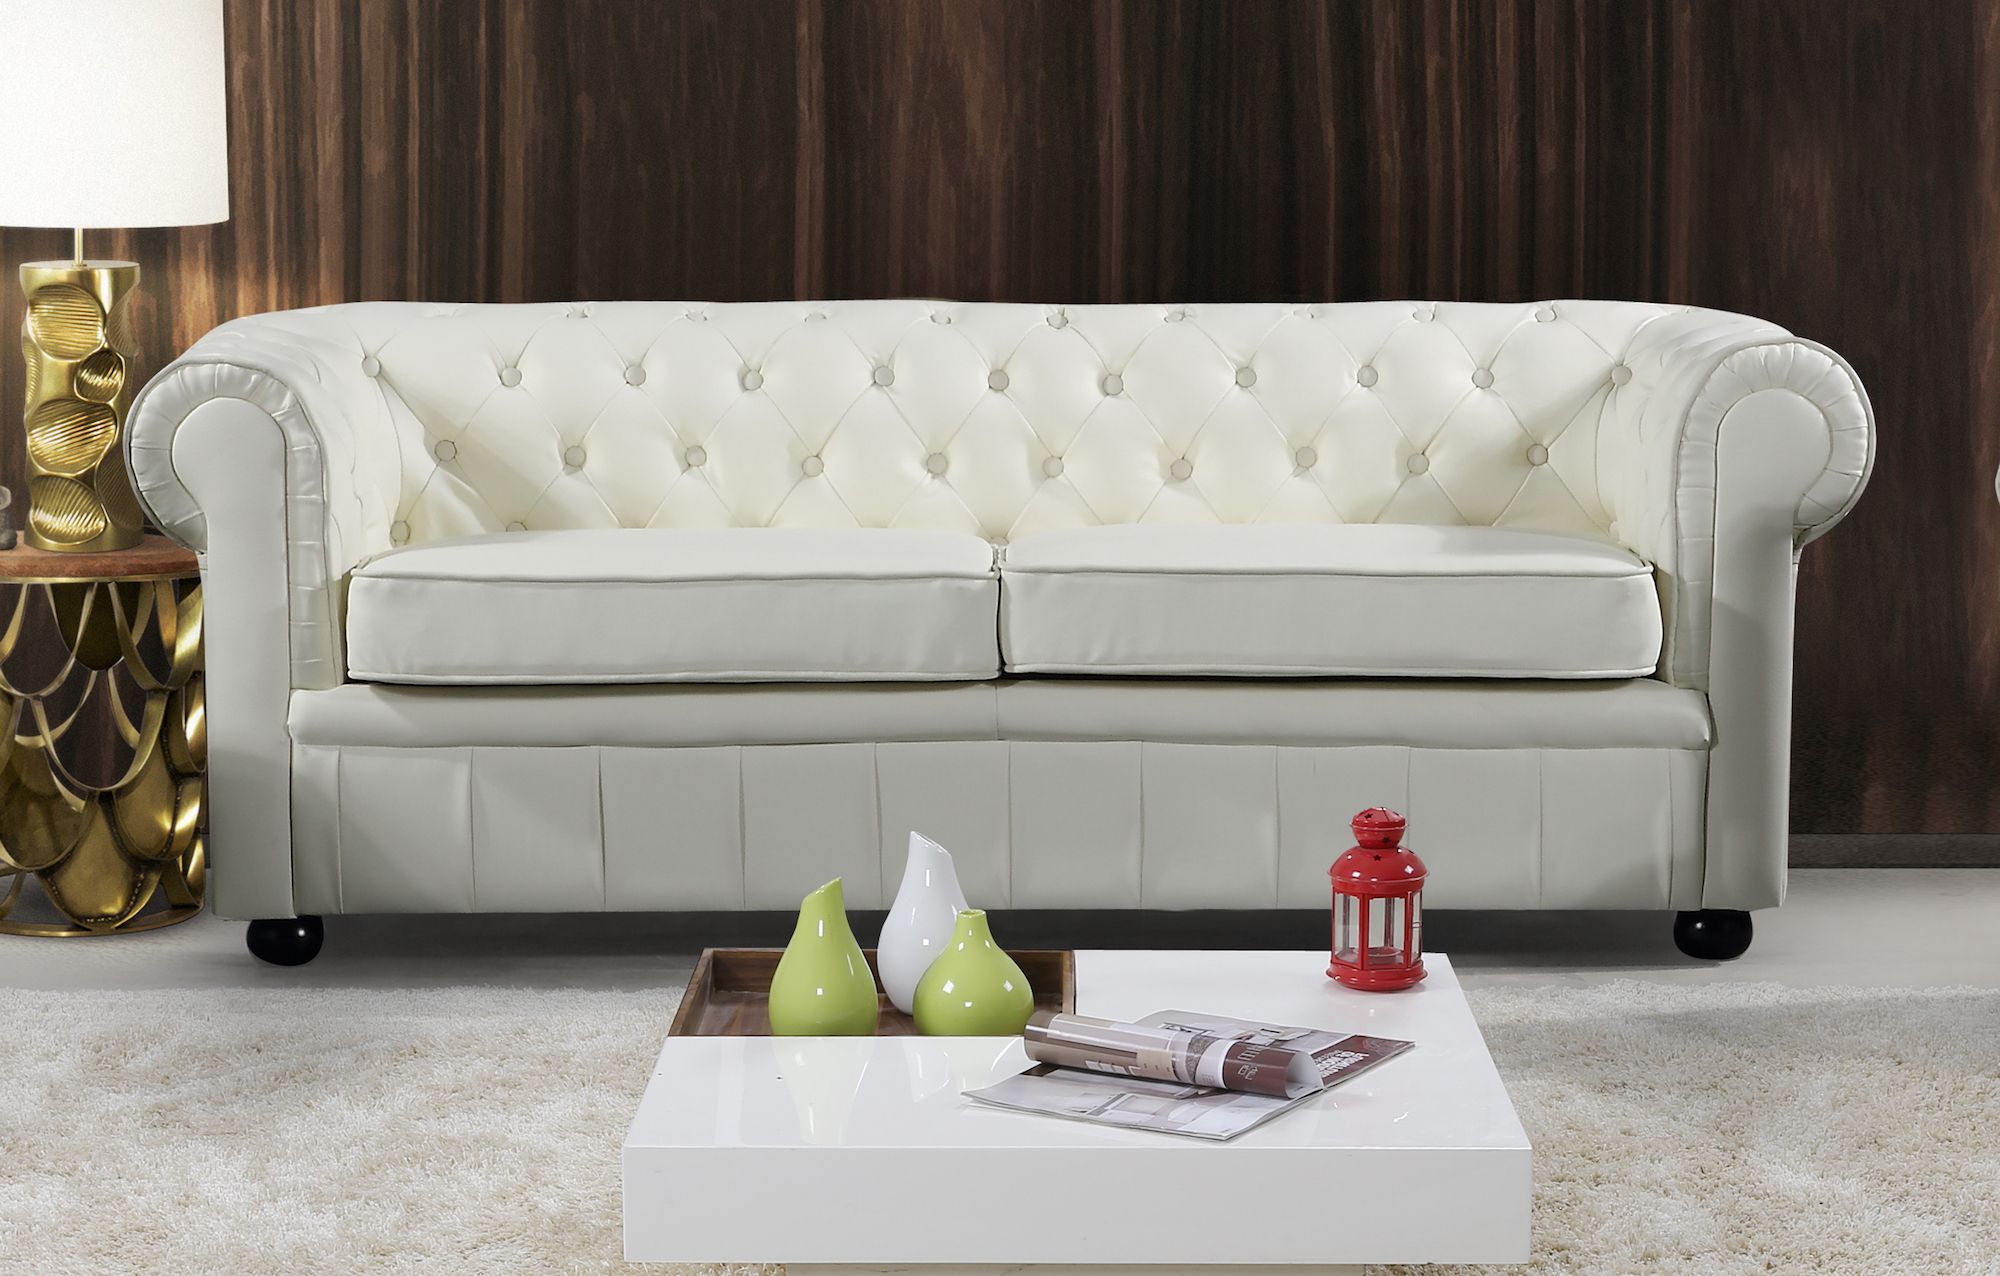 Modern Chesterfield Style Leather Sofa – Cream Leather Within Sofas In Cream (View 11 of 20)